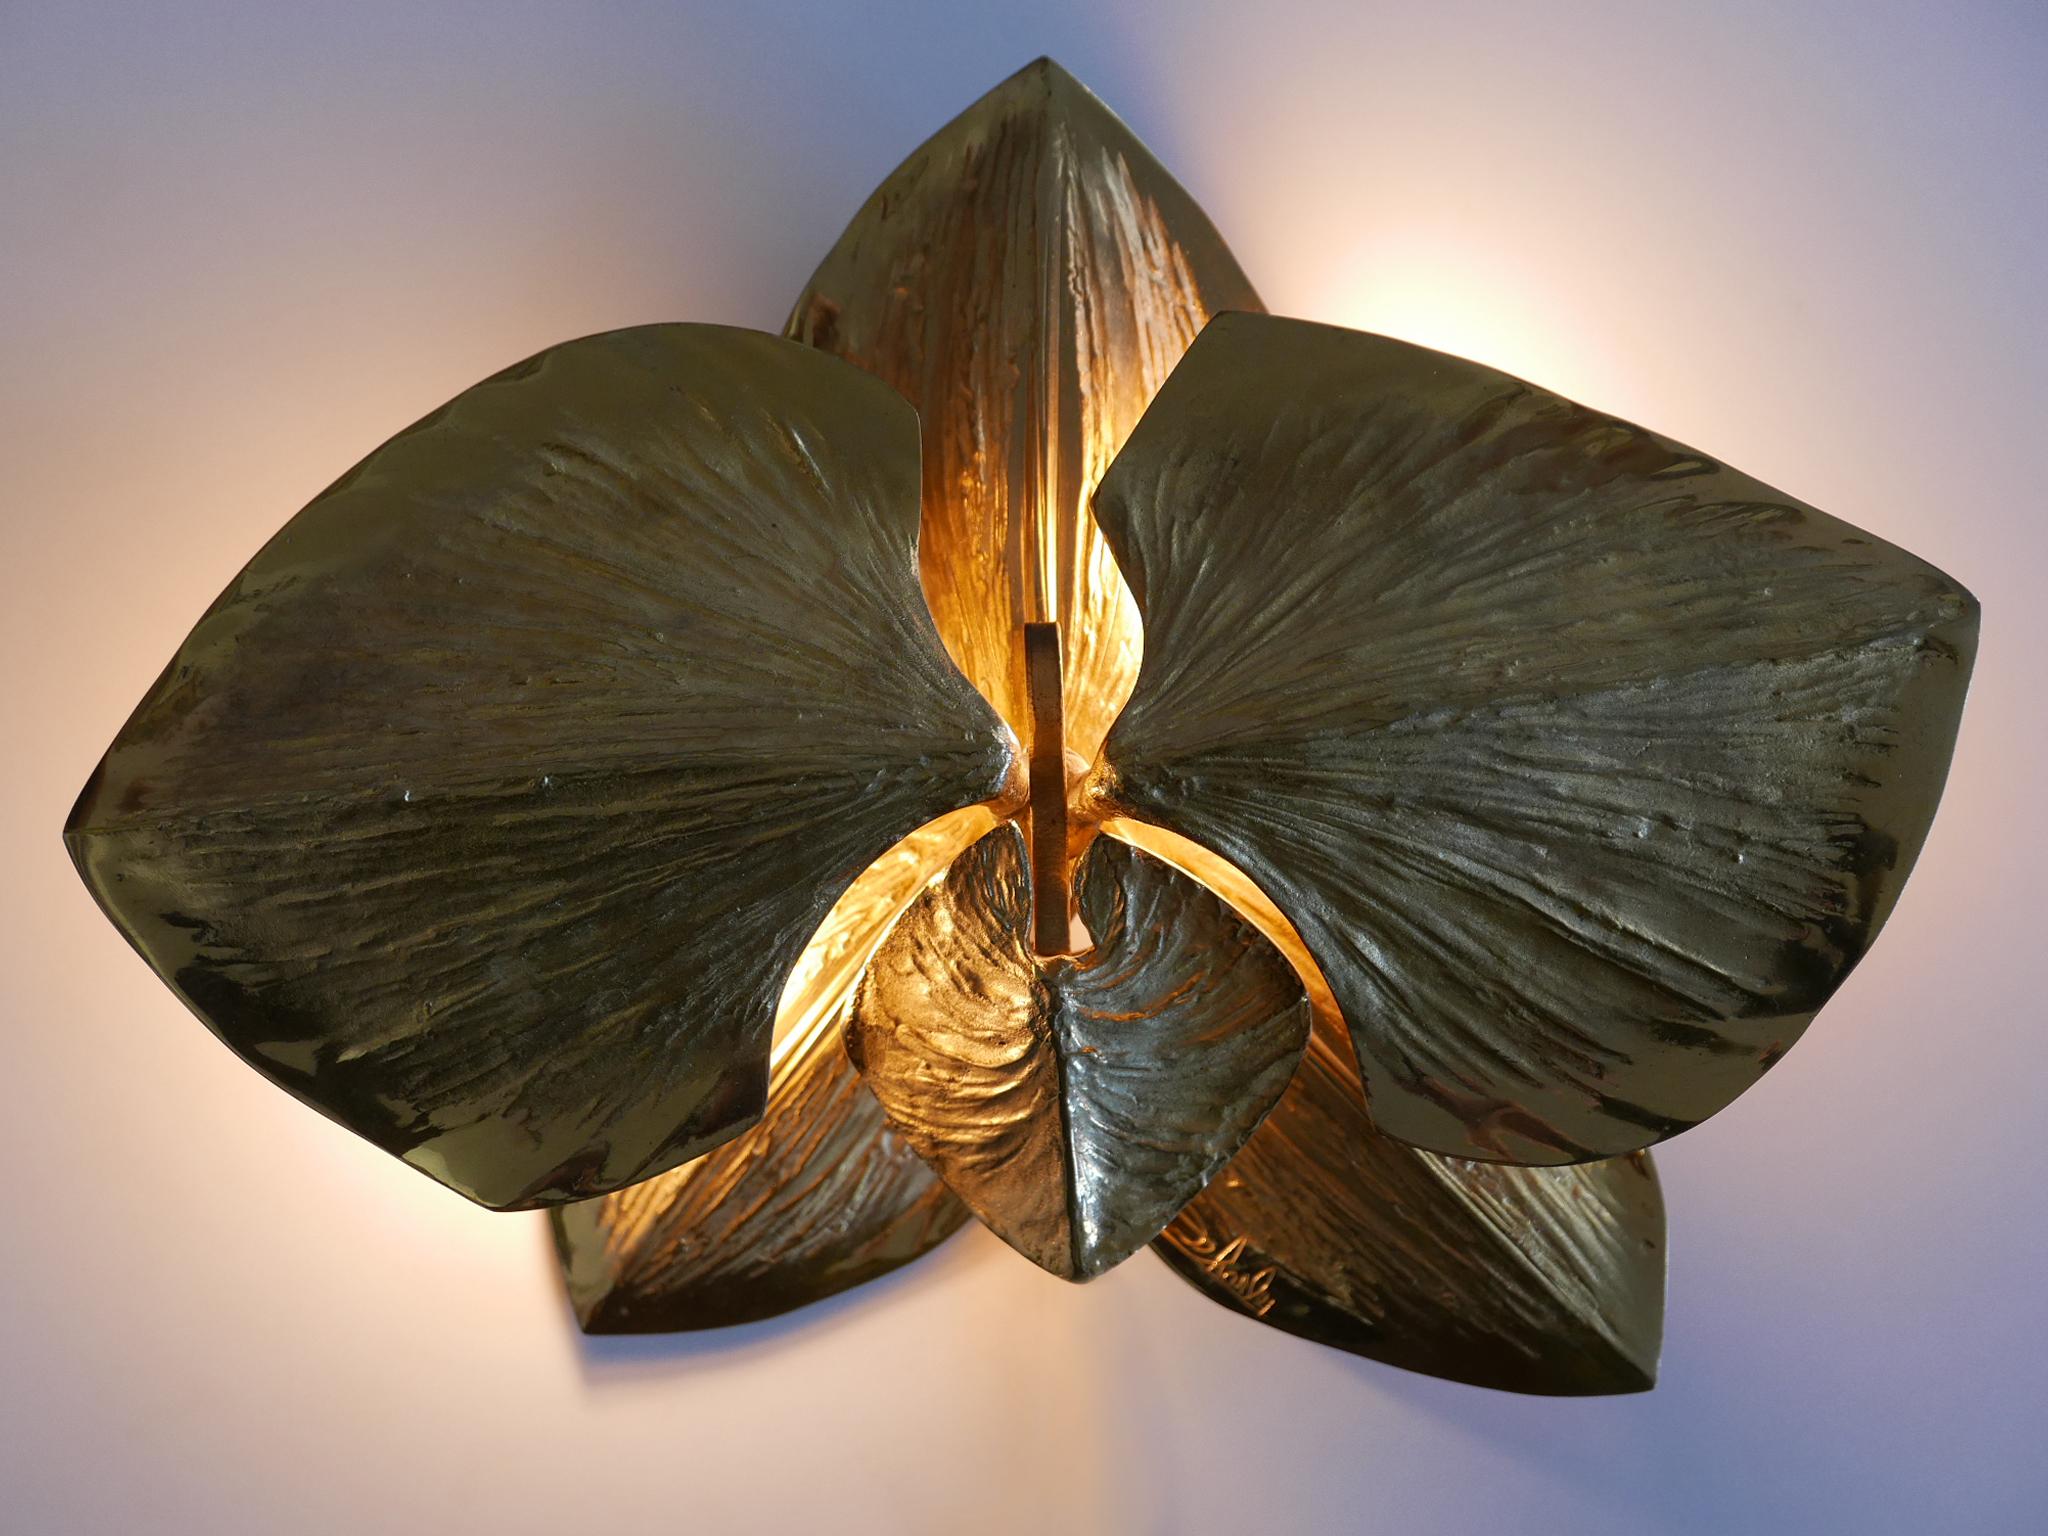 Extremely rare and elegant sconce 'Orchid'. Designed by Chrystiane Charles. Handmade by Maison Charles et Fils, Paris, 1980s. Signed & numbered: Charles. 004. Made in France.

Executed in gilt bronze, the sconce needs 2 x E14 / E12 Edison screw